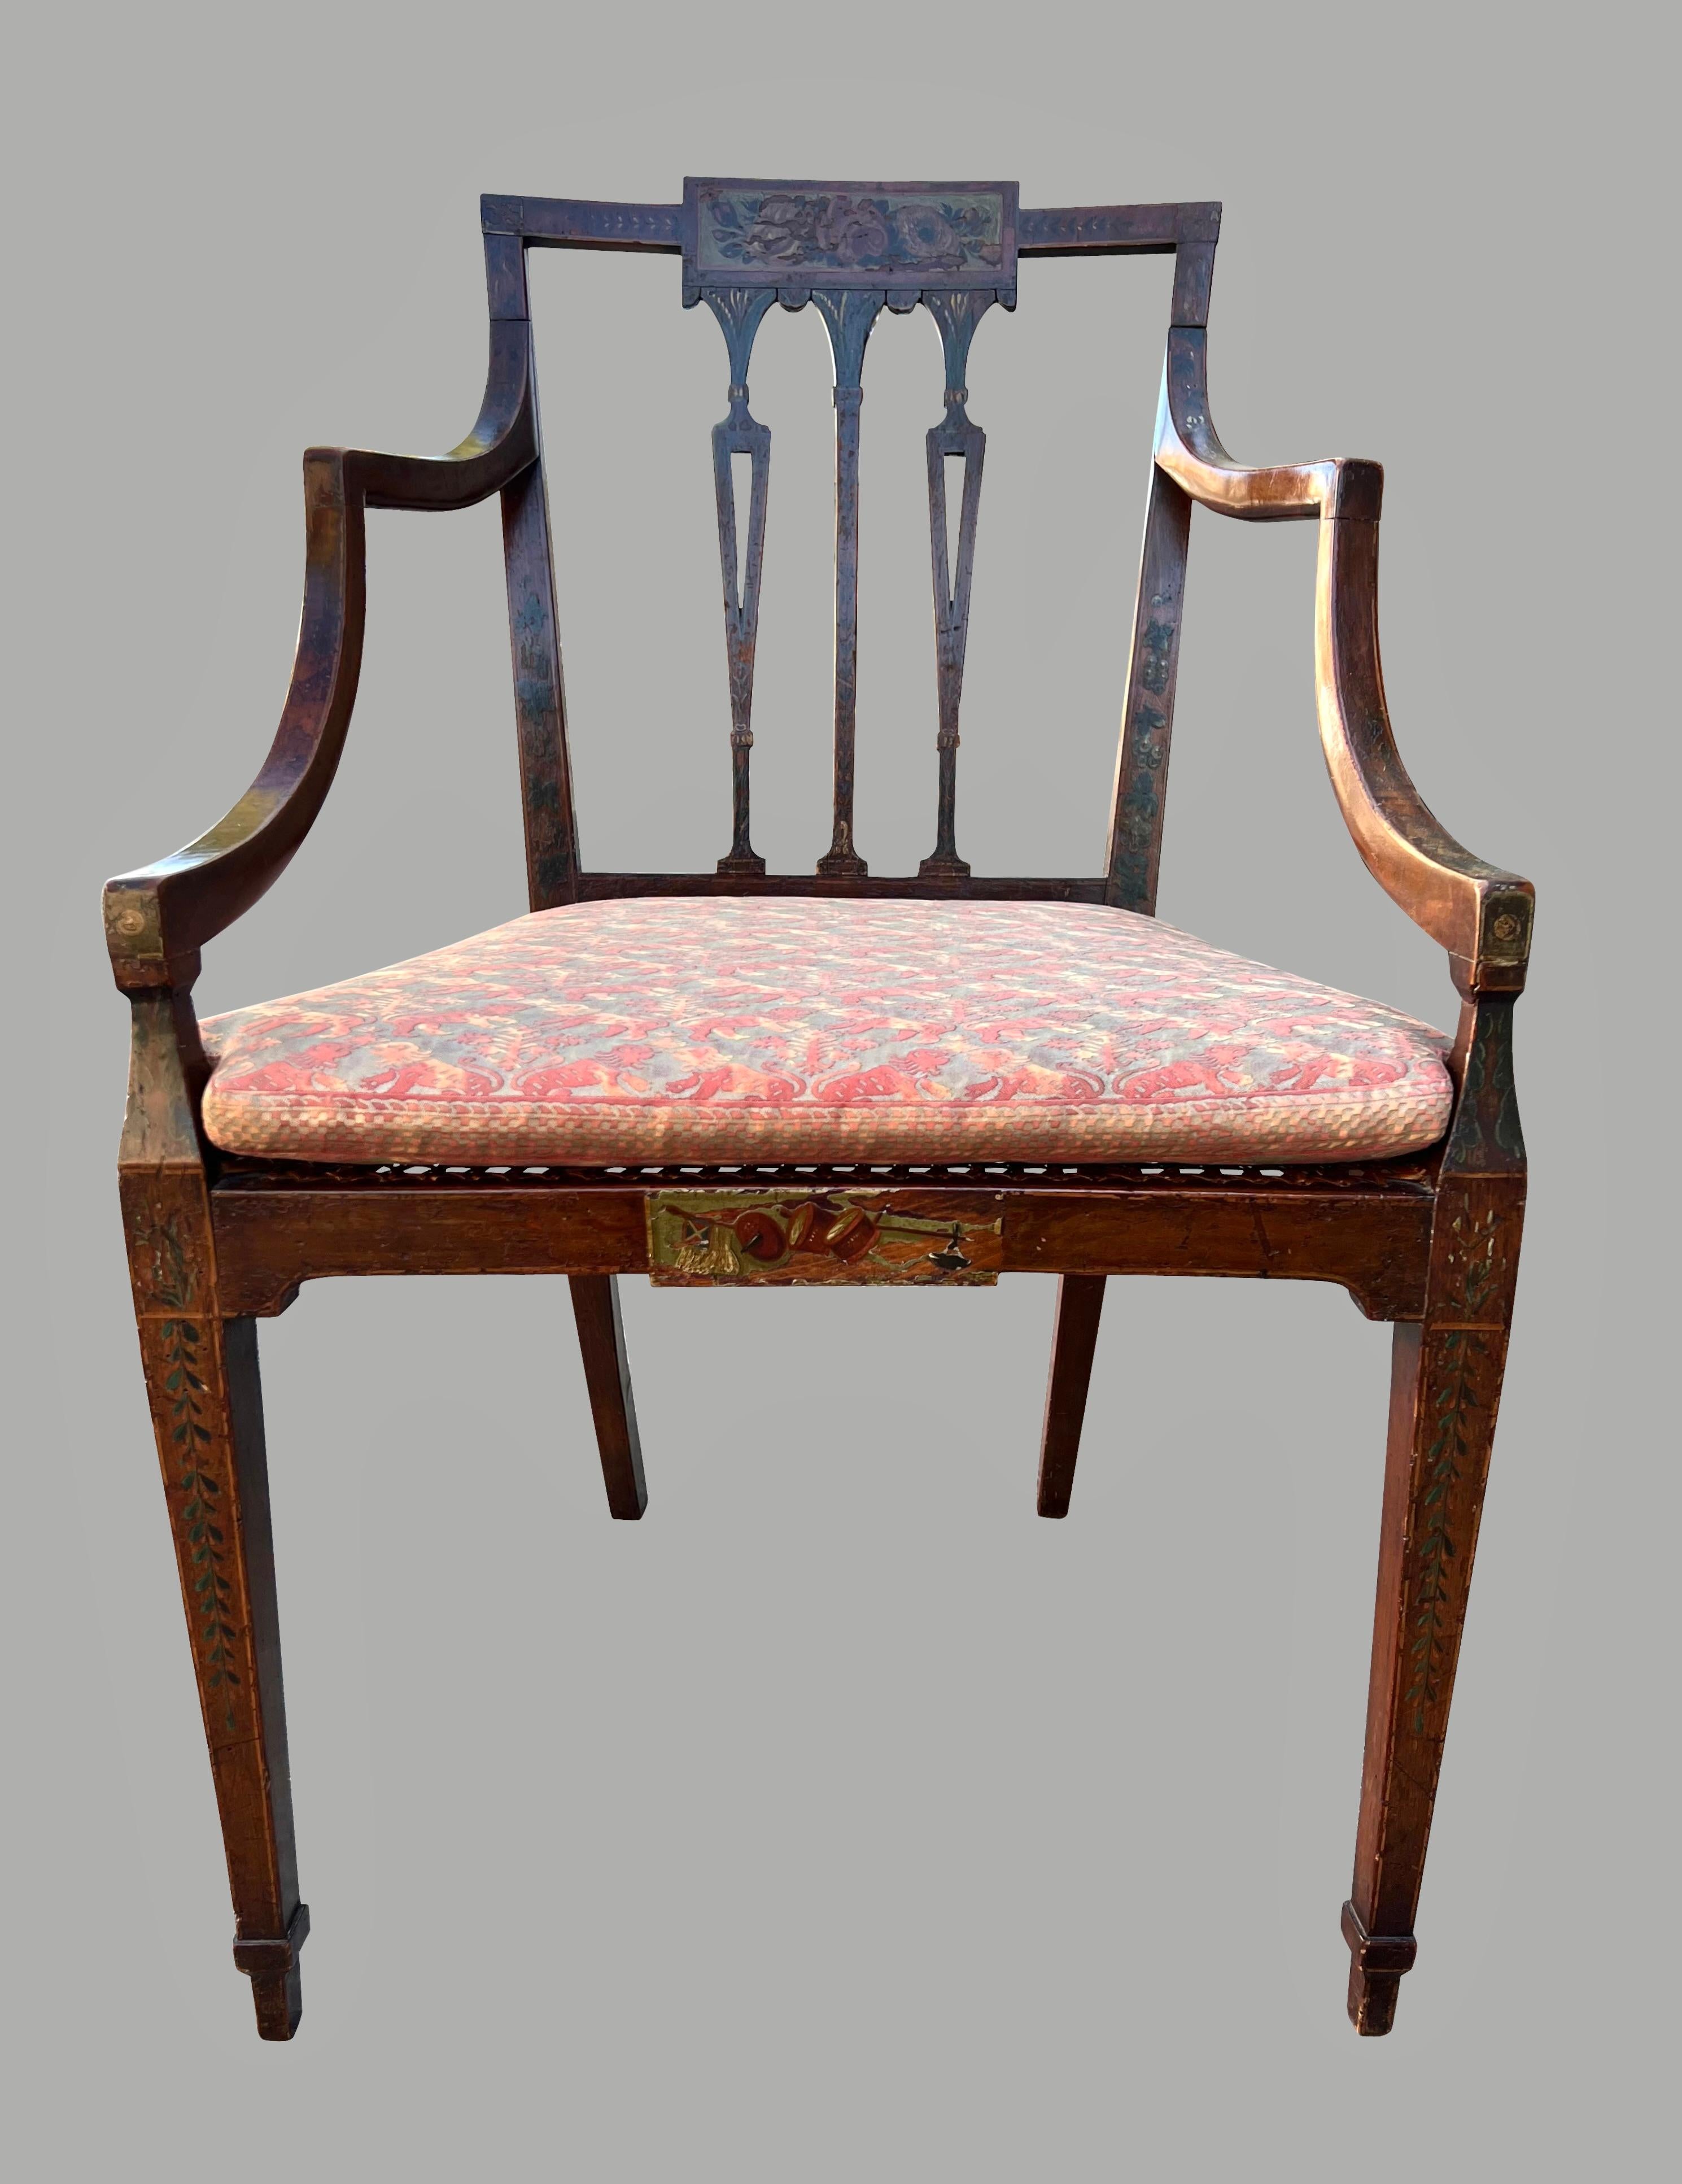 A pretty late 18th century English satinwood Adam style open armchair decorated overall with bellflowers, the square back centered by a further decorated panel depicting a bouquet, the seat frame centered by a similar panel decorated with musical